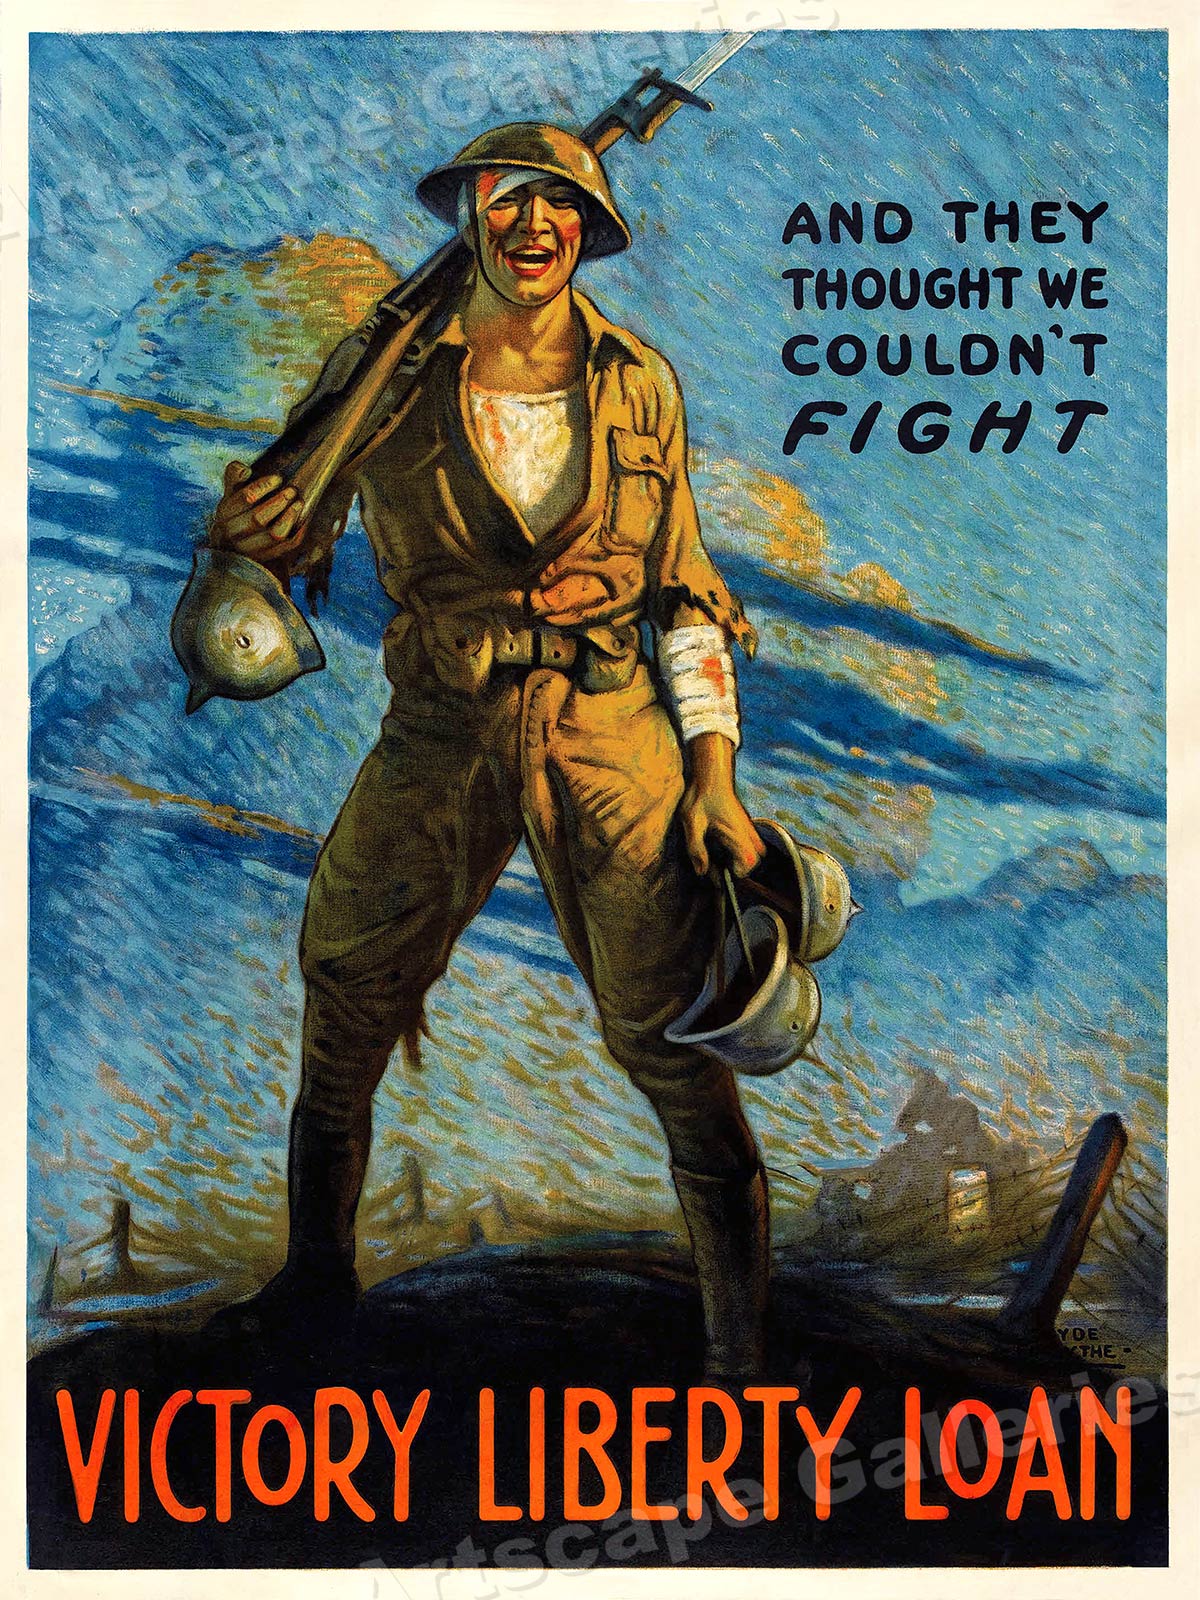 1918 "And They Thought We Couldn't Fight!" WW1 Liberty Loan War Poster 20x28